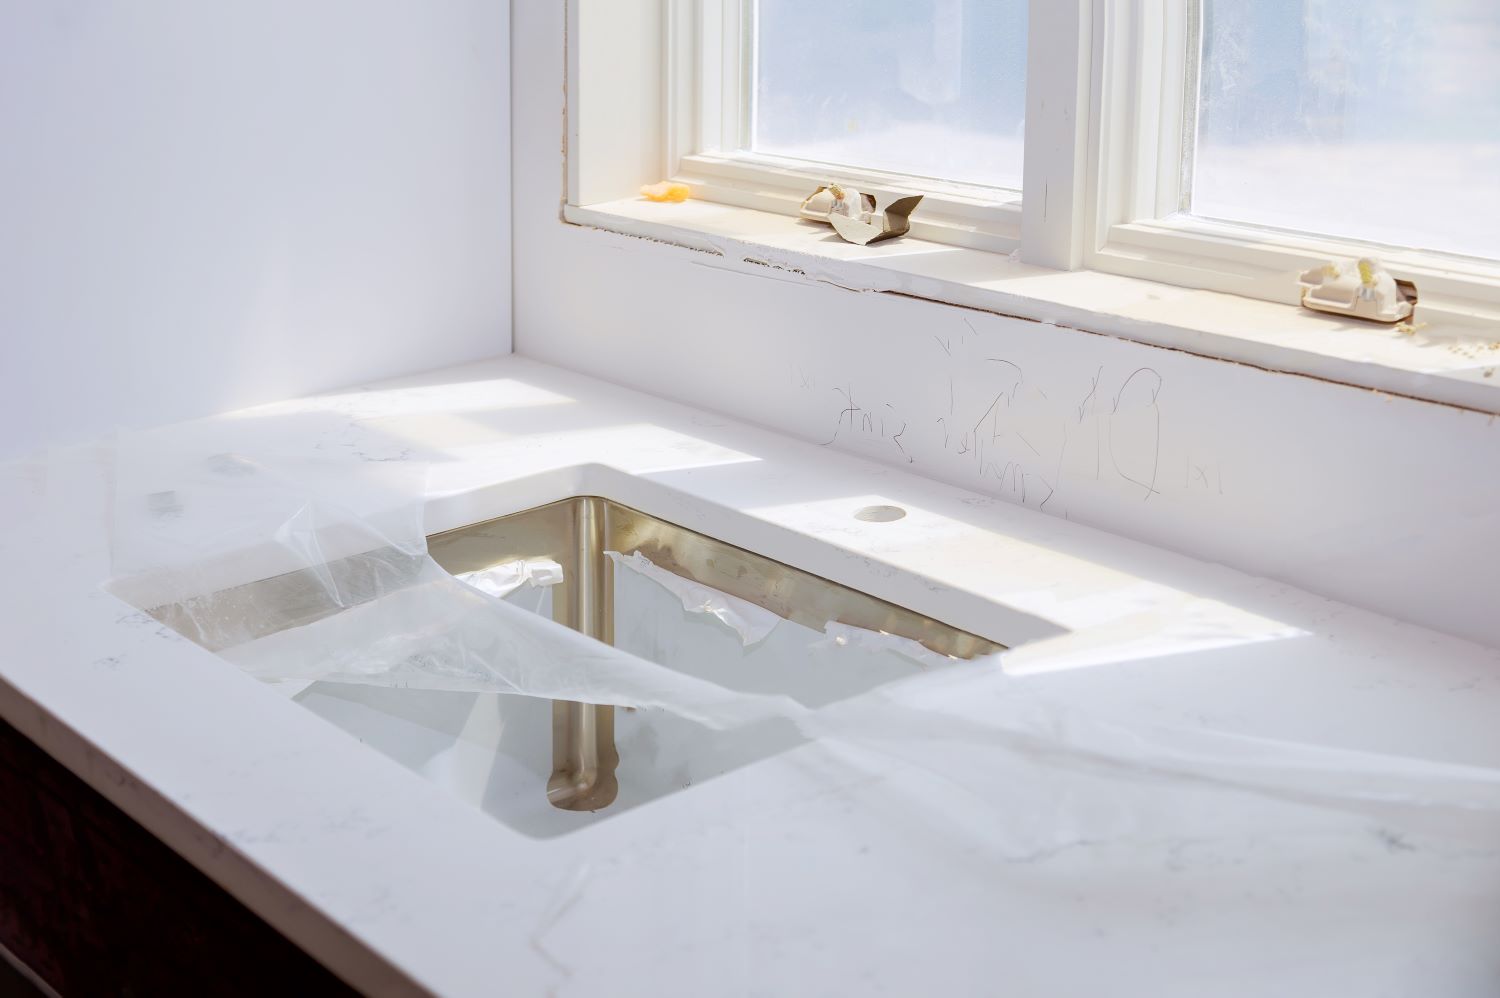 Things to Consider Before Replacing Your Countertop